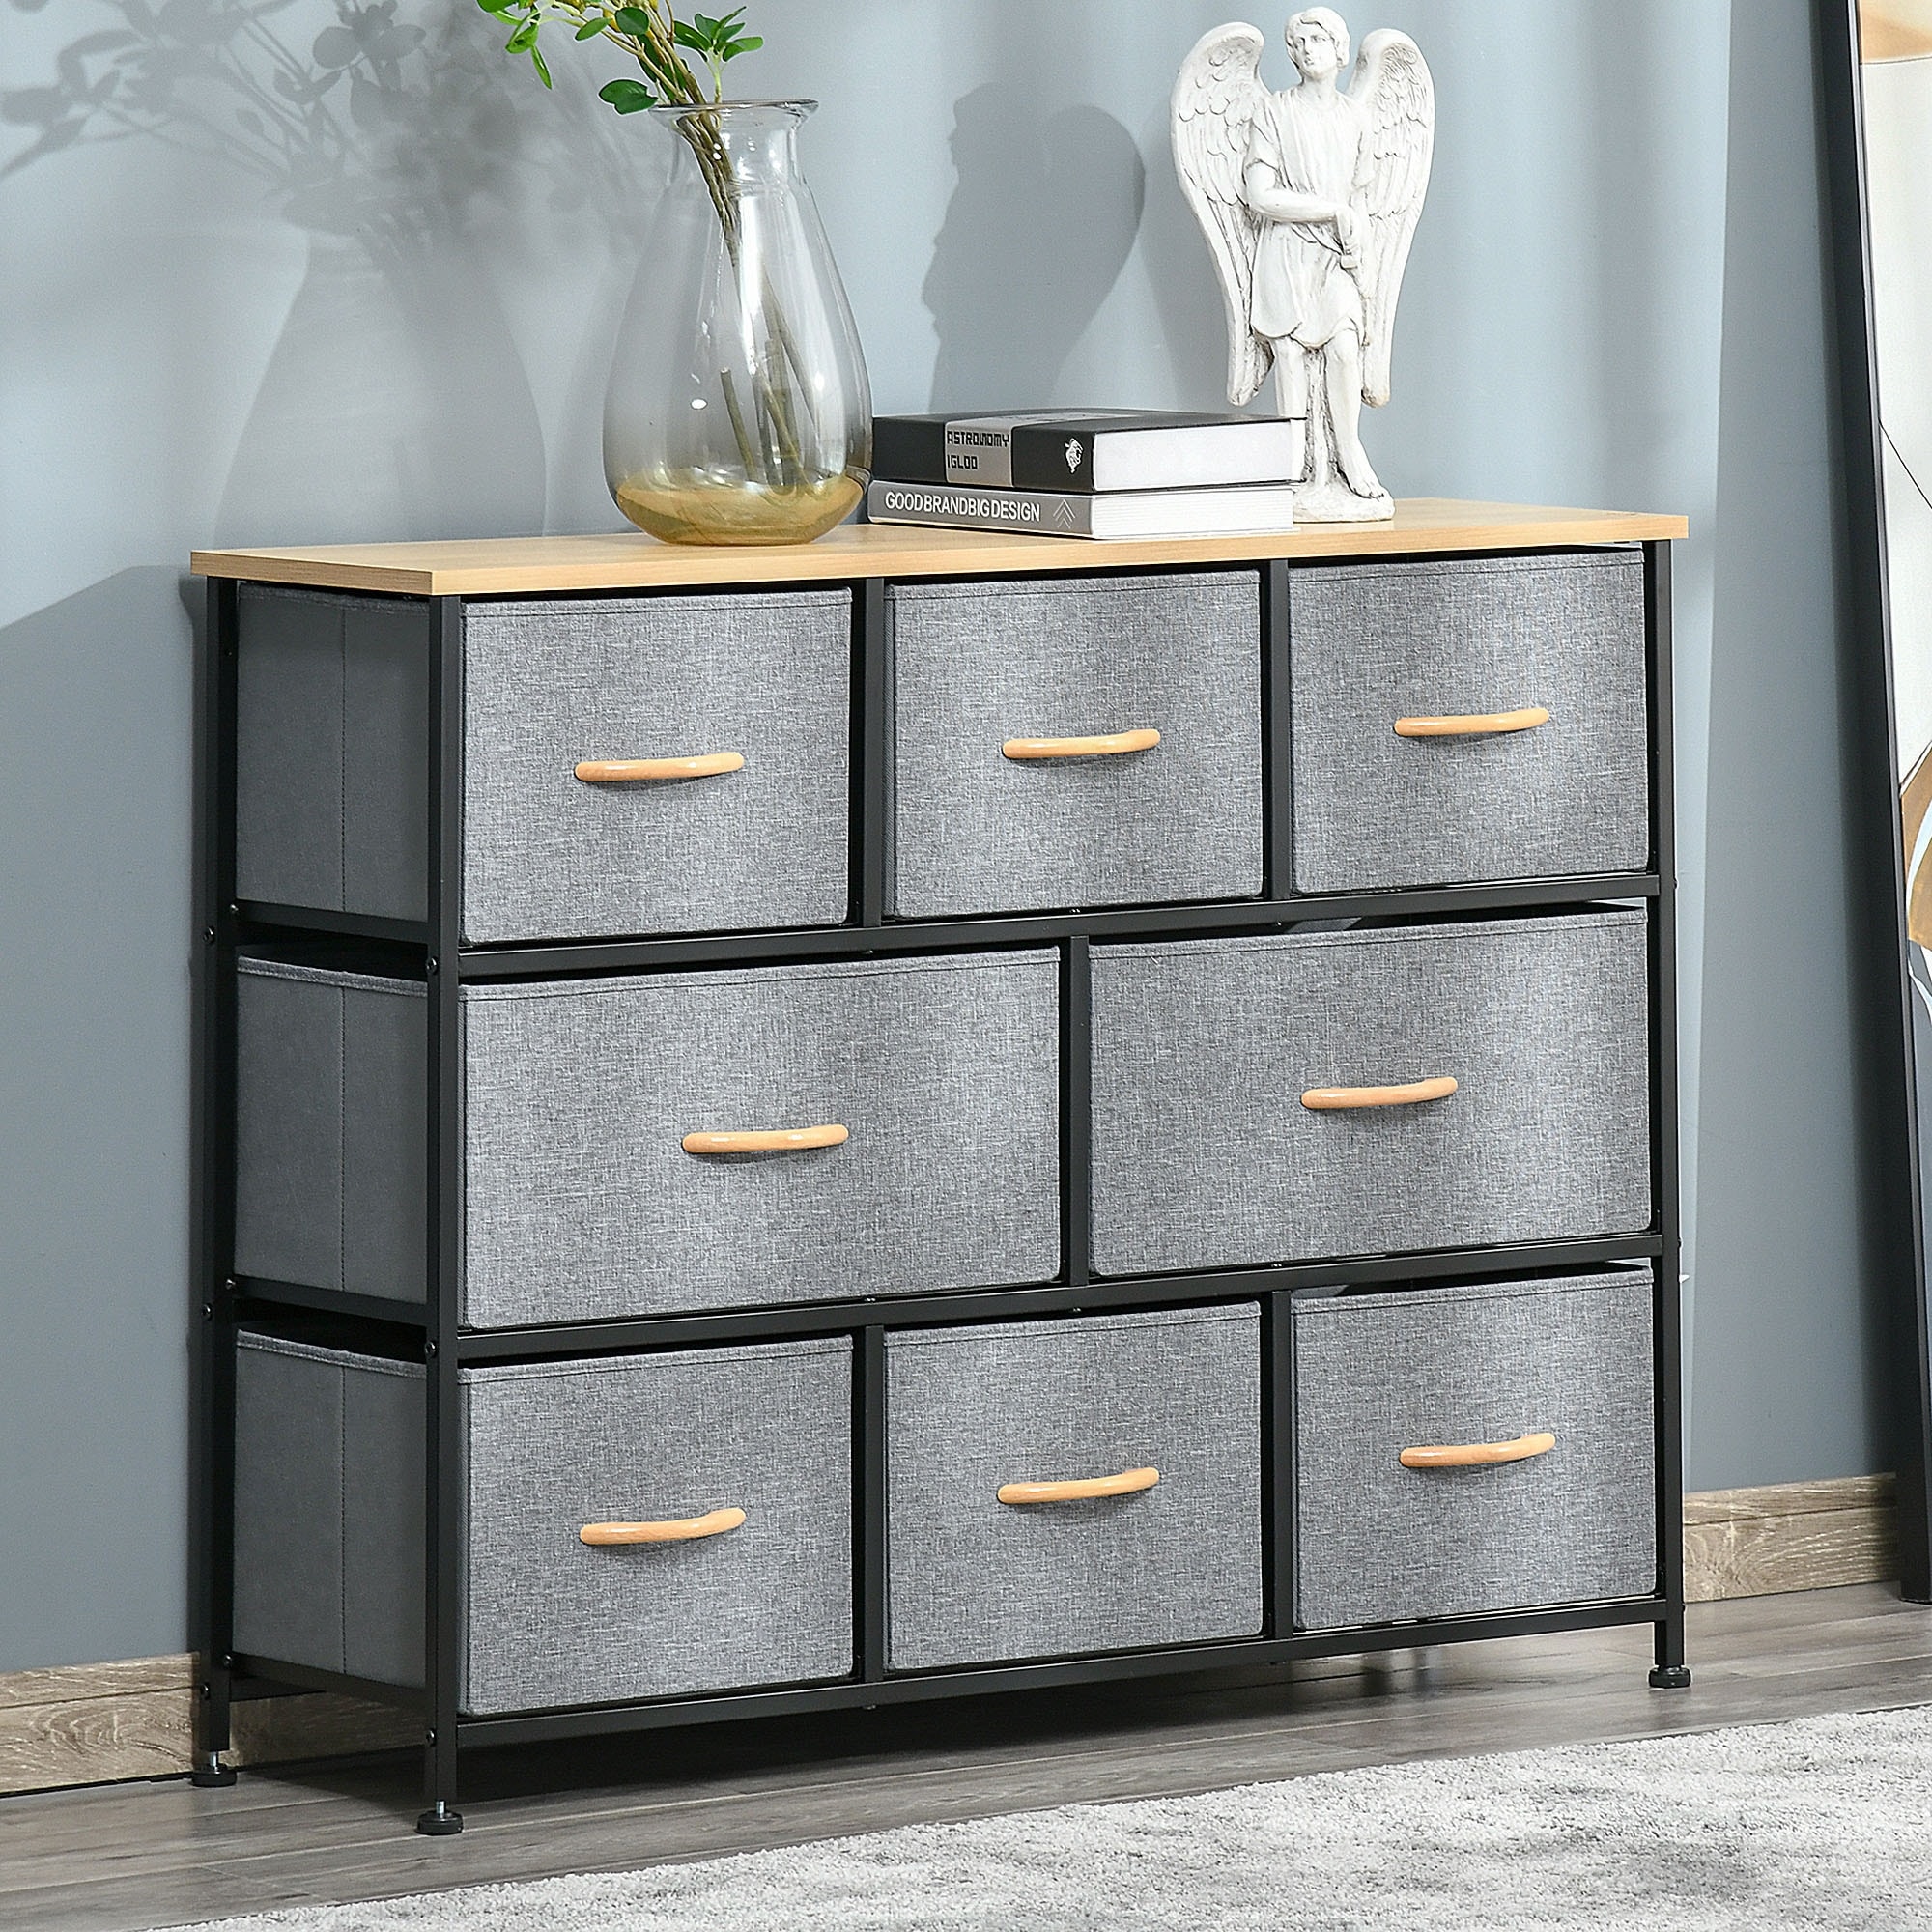 https://ak1.ostkcdn.com/images/products/is/images/direct/f1ac3f527fa41038183ede38f8171f5f0e8bac7b/HOMCOM-8-Drawer-Dresser%2C-3-Tier-Fabric-Chest-of-Drawers%2C-Storage-Tower-Organizer-Unit-with-Steel-Frame-Wooden-Top-for-Bedroom.jpg